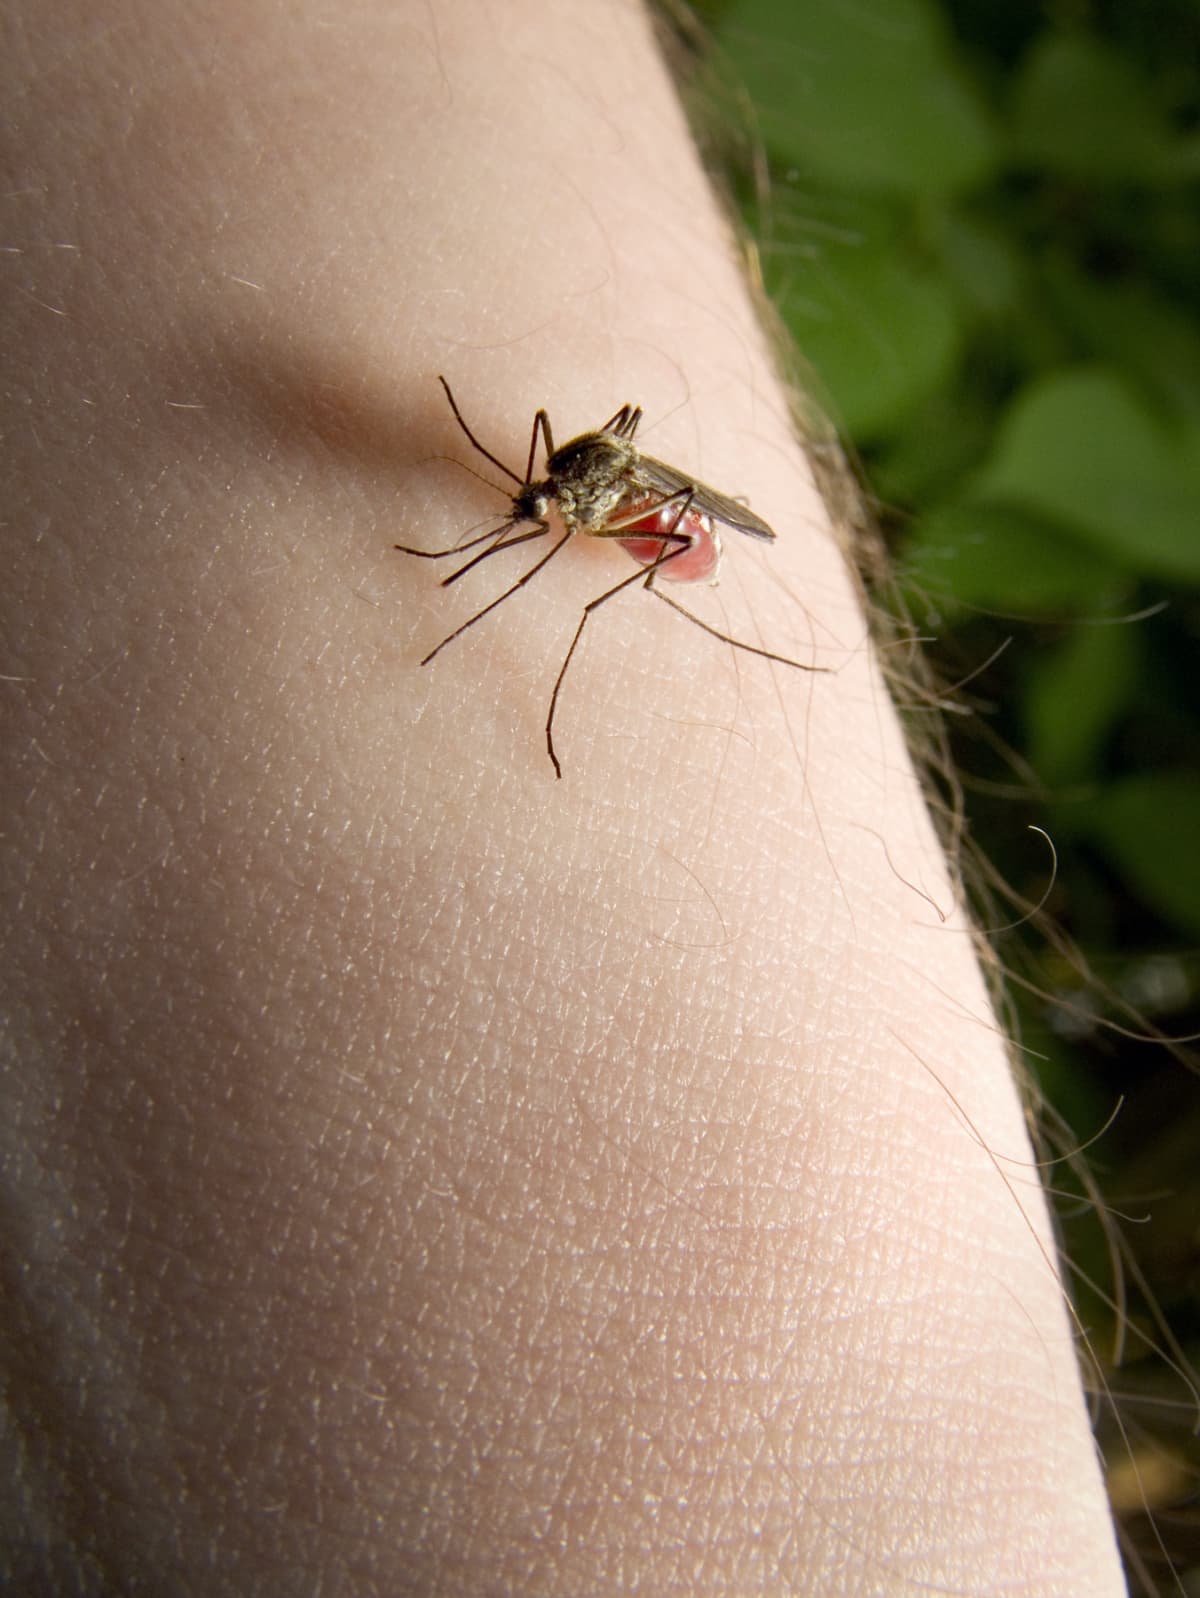 Close-up of a mosquito on an arm